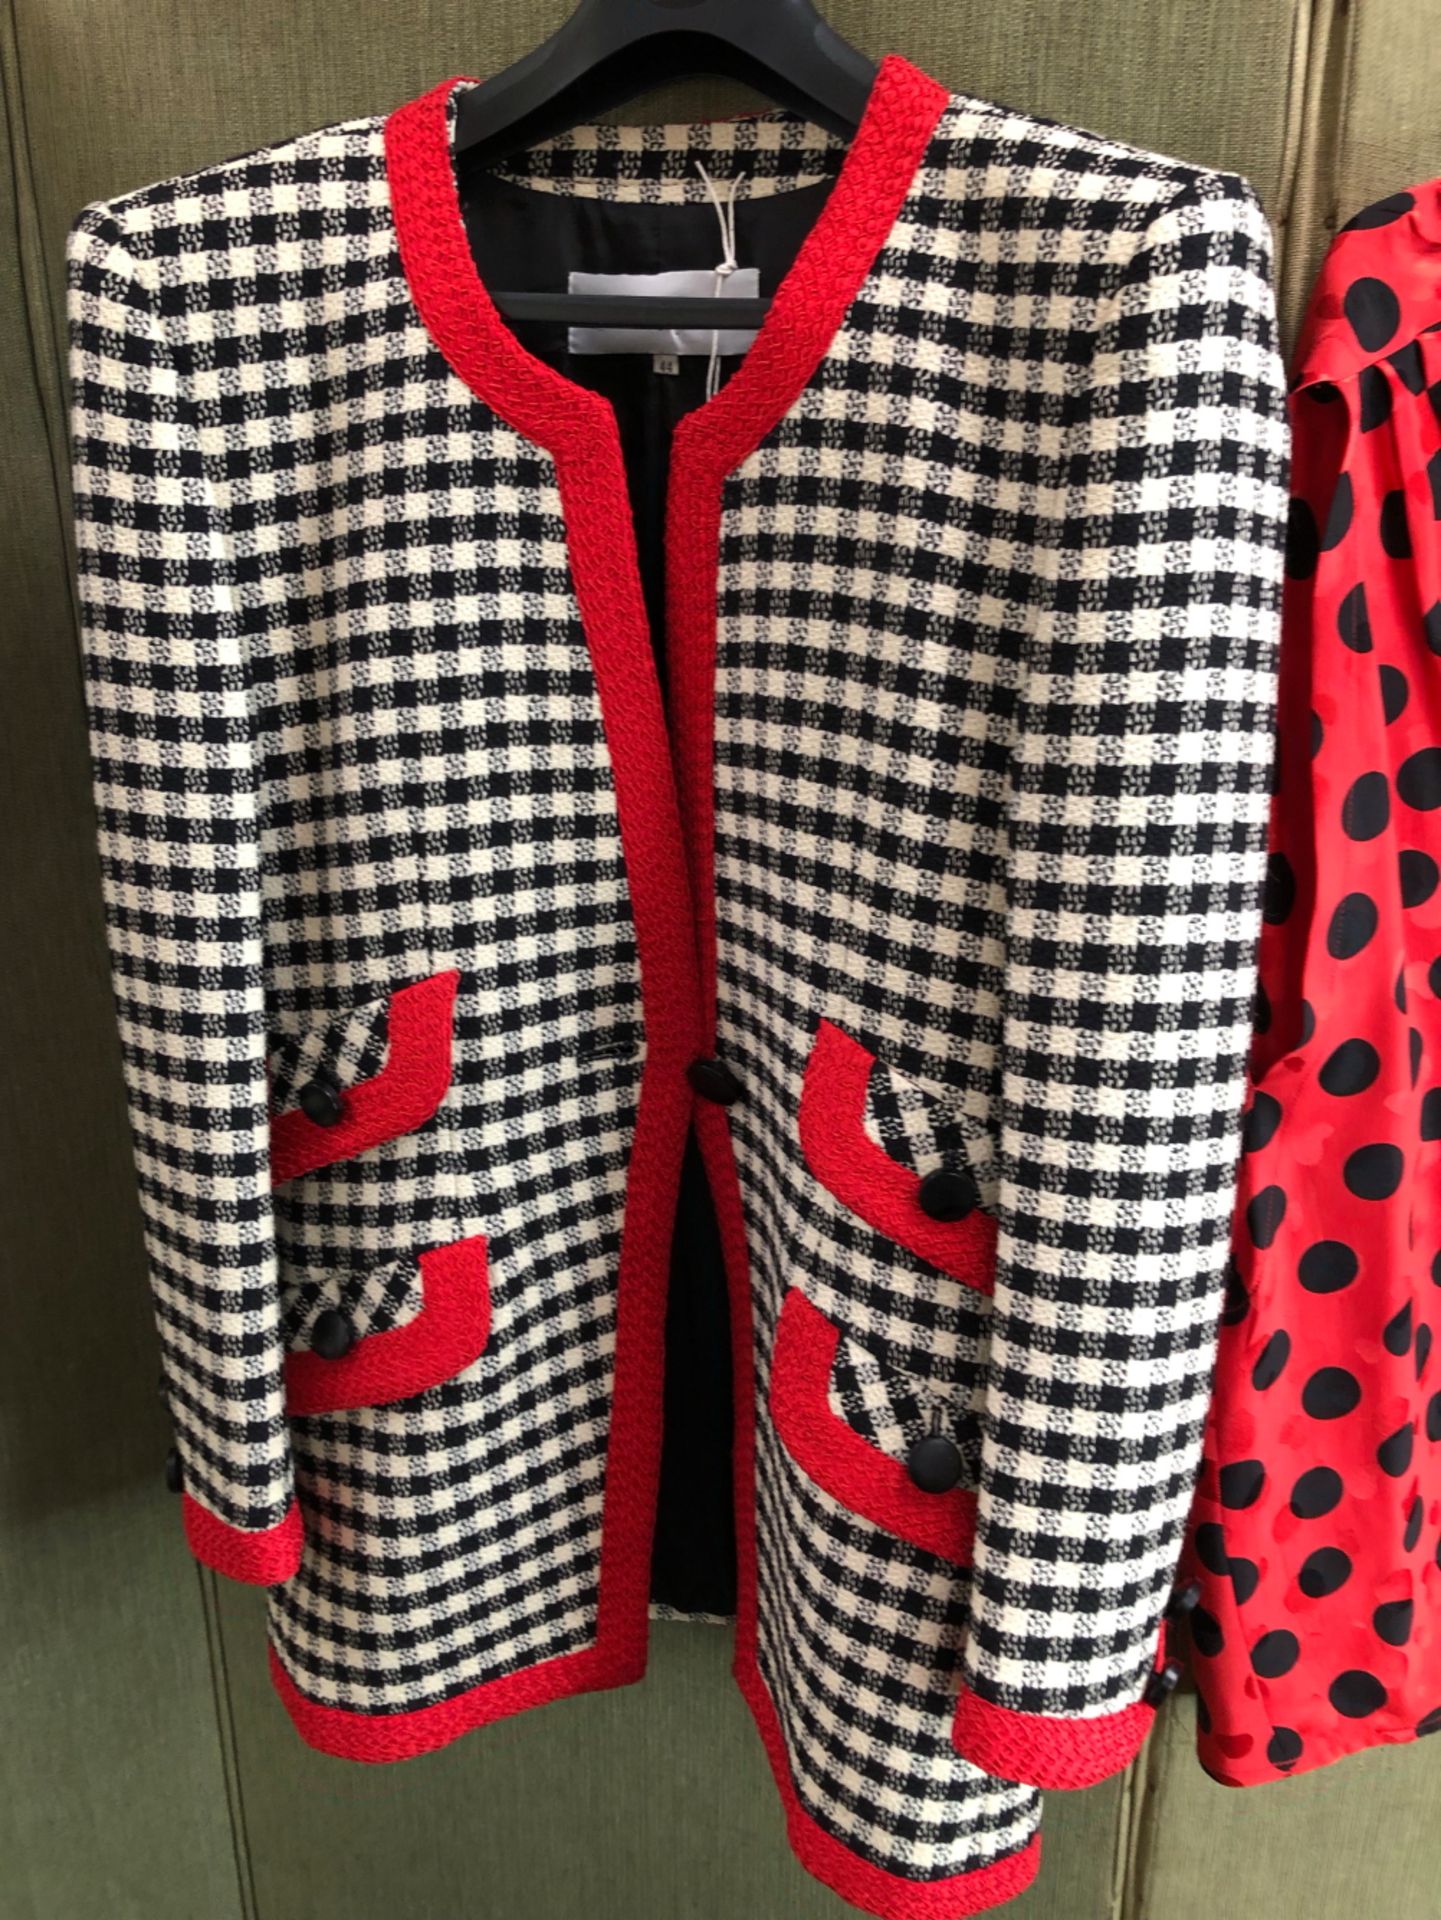 A MARIO BORSATO BLACK AND WHITE CHECKED LADIES BLAZER WITH RED TRIM SIZE 44, TOGETHER WITH A MARIO - Image 6 of 6